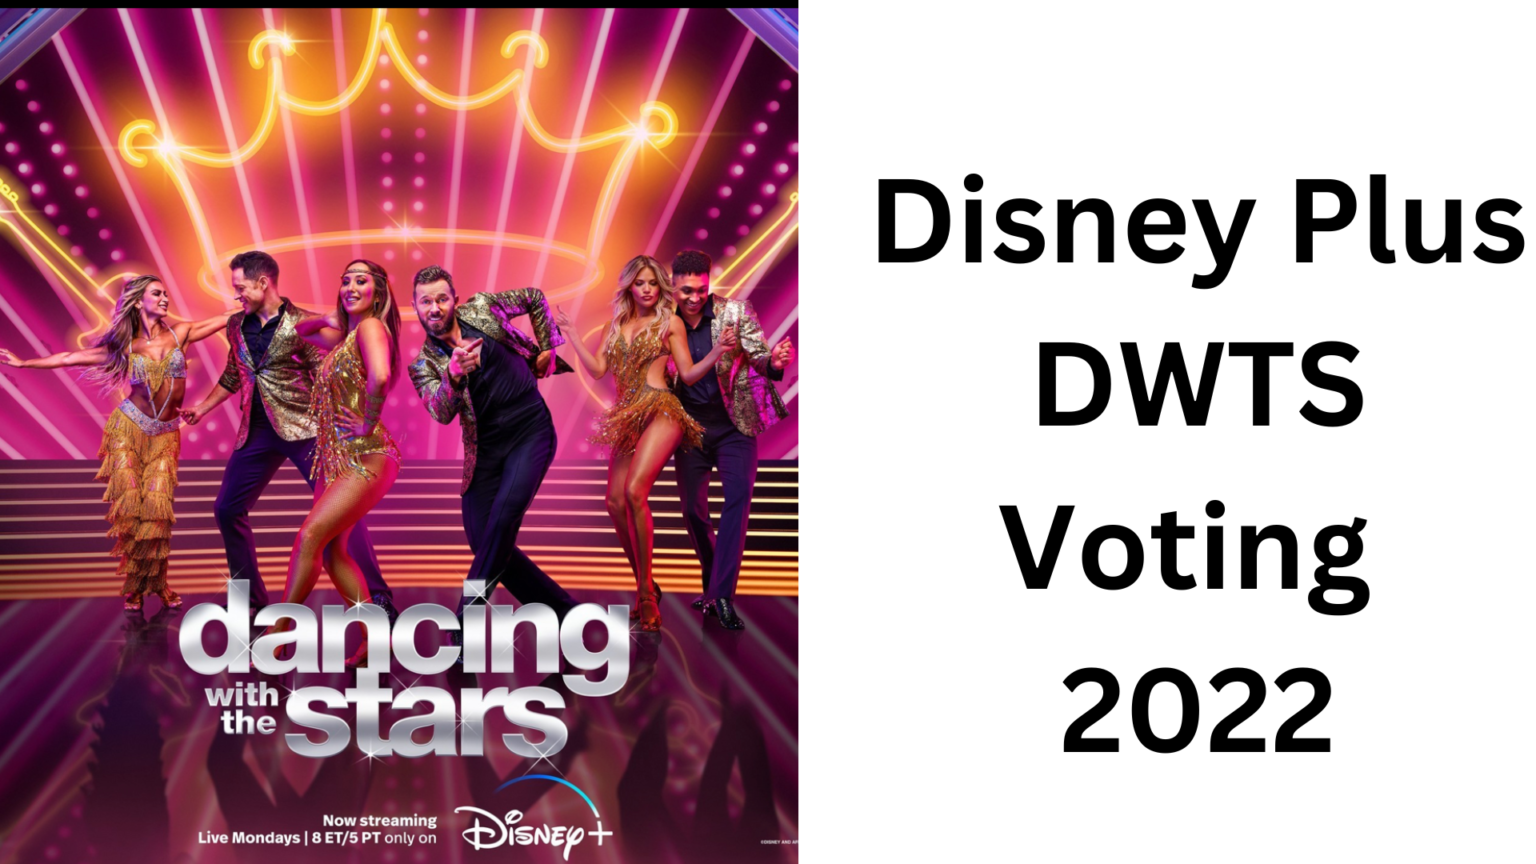 Dancing With The Stars Voting 2022 (How To Vote) DWTS Online